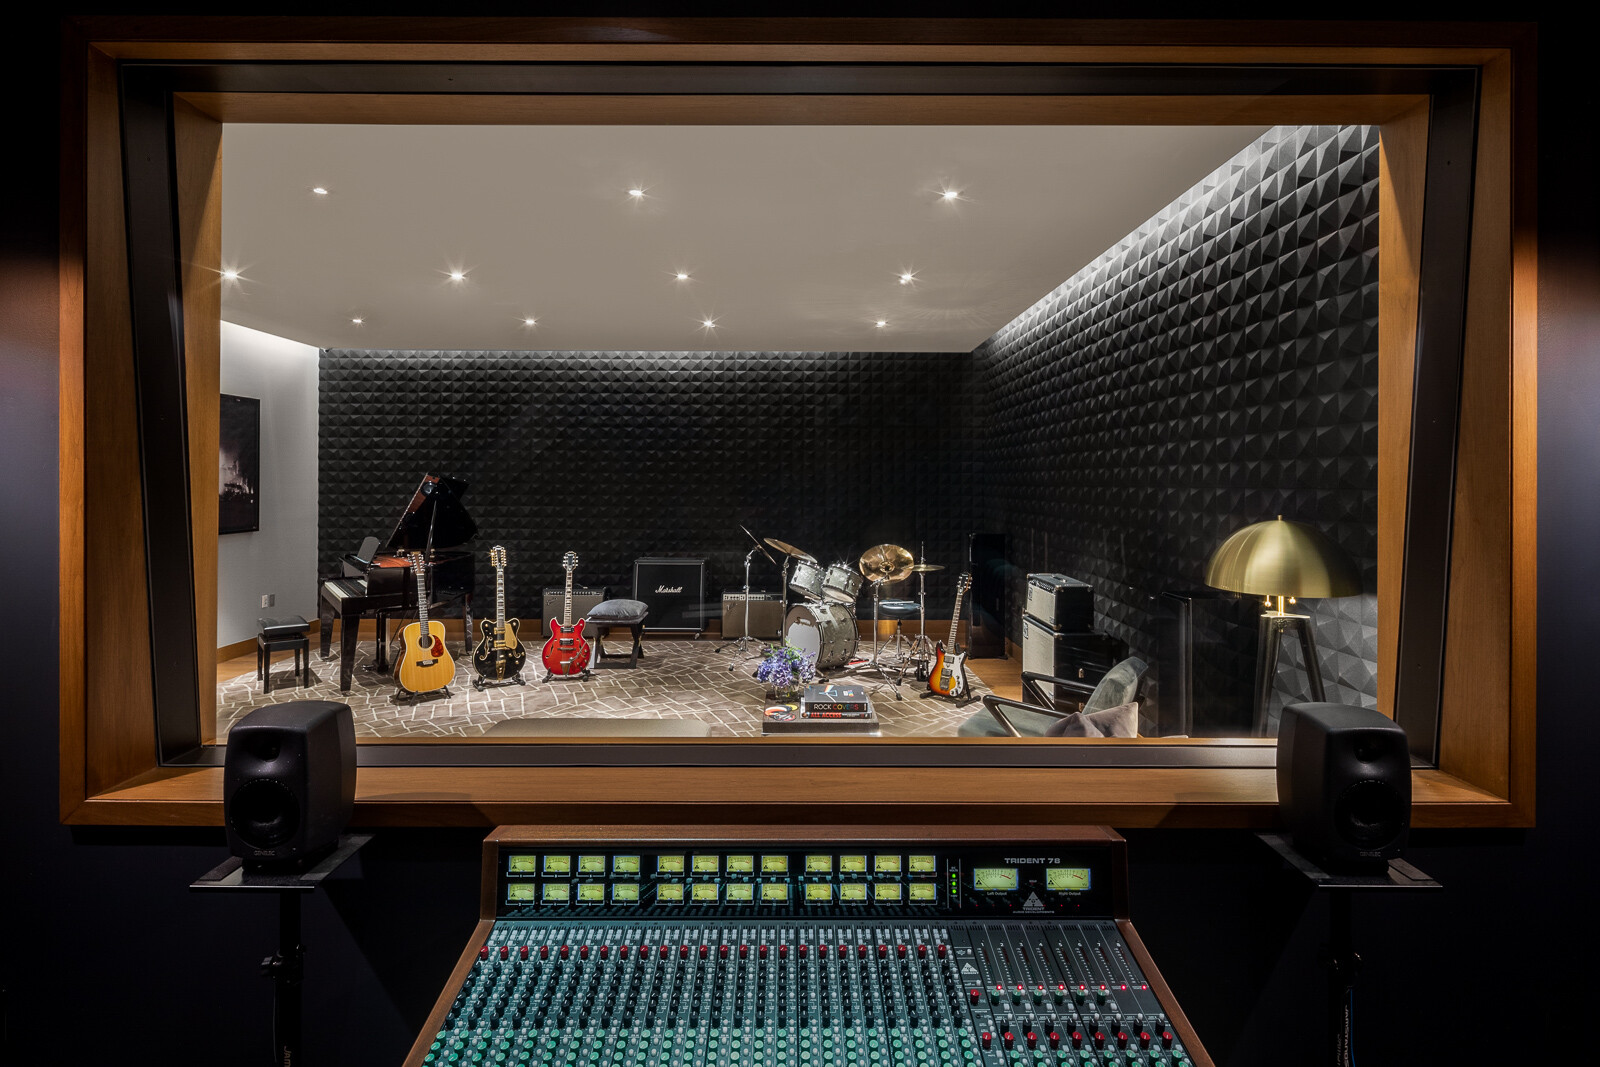 A modern and well-equipped music recording studio, viewed from the control room through a large window, featuring a selection of guitars, a drum set, keyboards, and soundproofing on the walls.